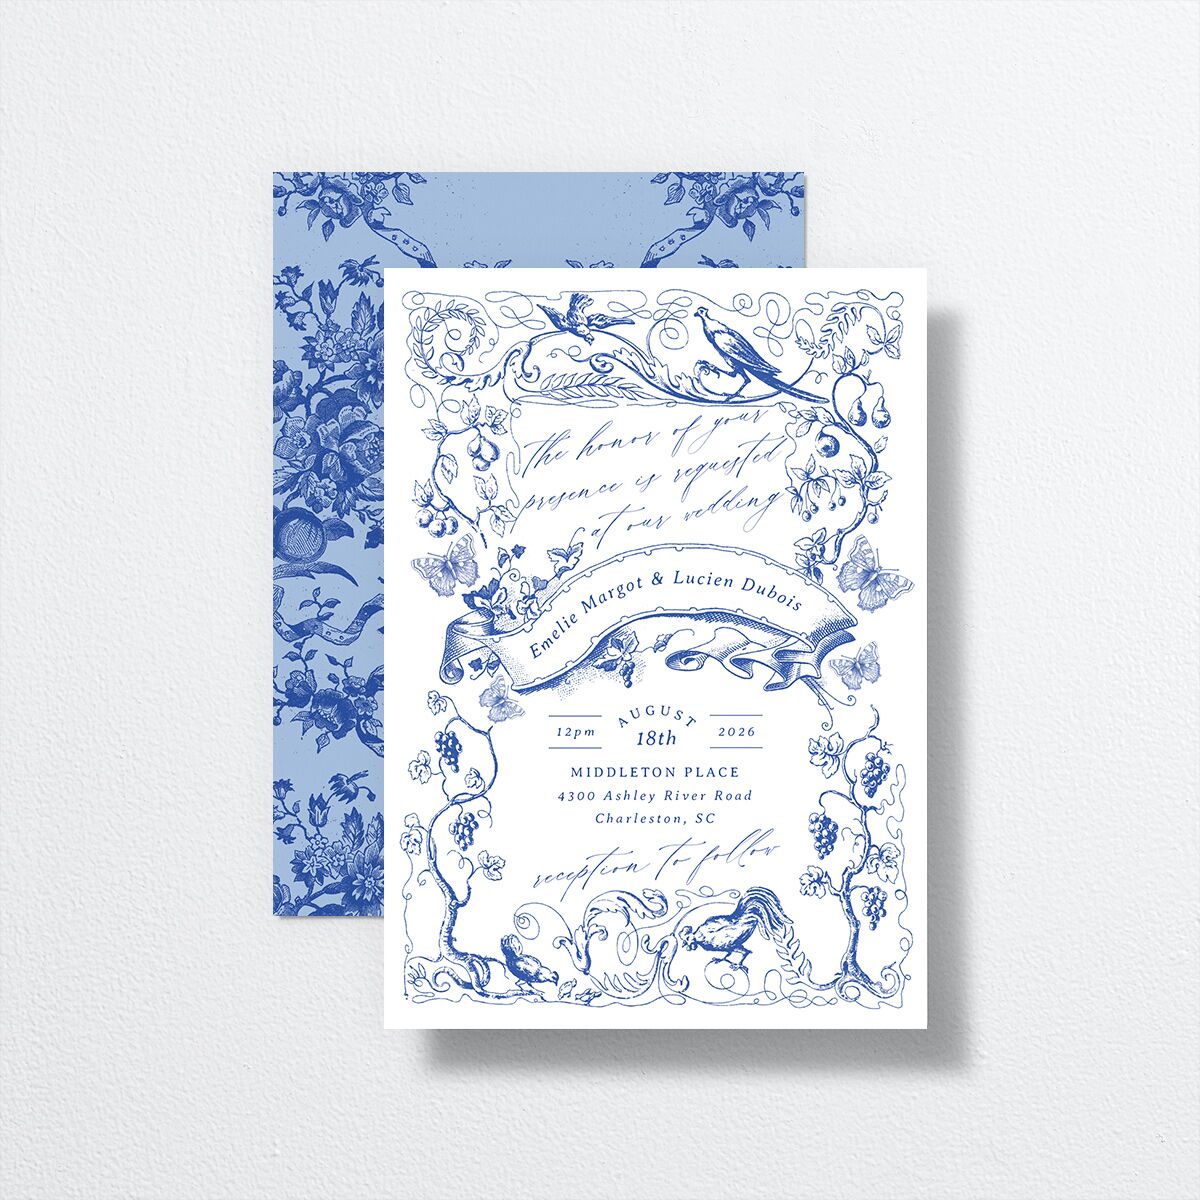 Vintage Toile Wedding Invitations front-and-back in blue